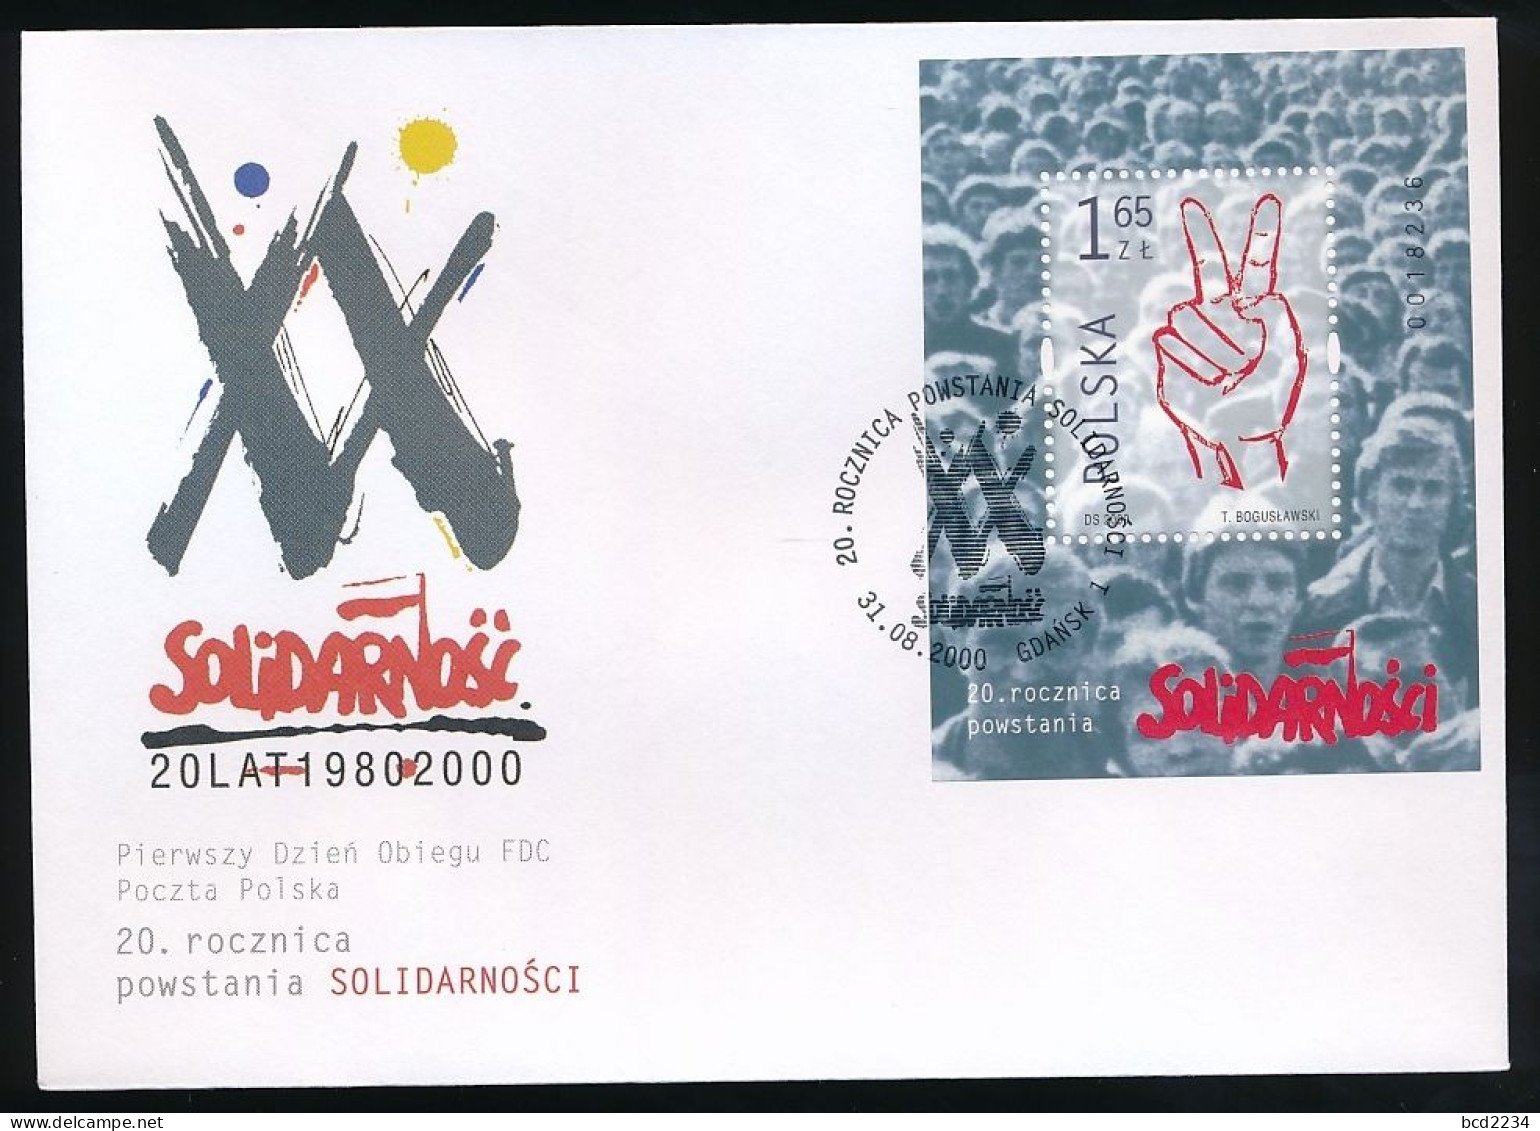 POLAND FDC 2000 SOLIDARITY SOLIDARNOSC 20TH ANNIV OF THE TRADE UNION MS V FOR VICTORY SIGN 2 FINGERS GDANSK DANZIG - Cartas & Documentos